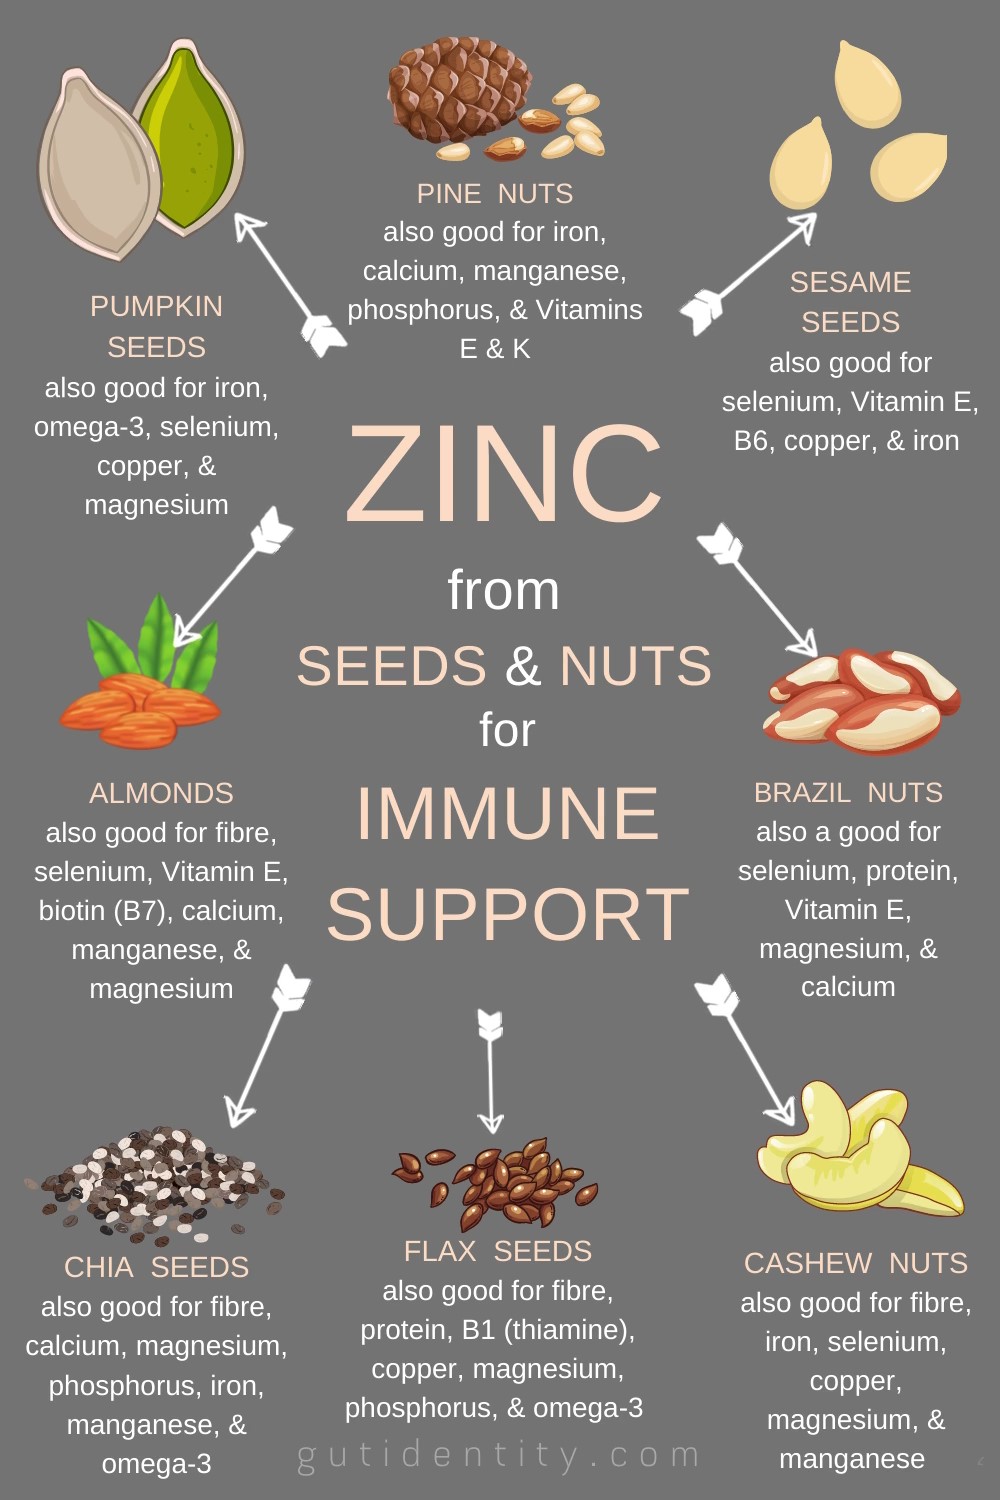 Zinc from Seeds and Nuts for Immune Support by Gutidentity